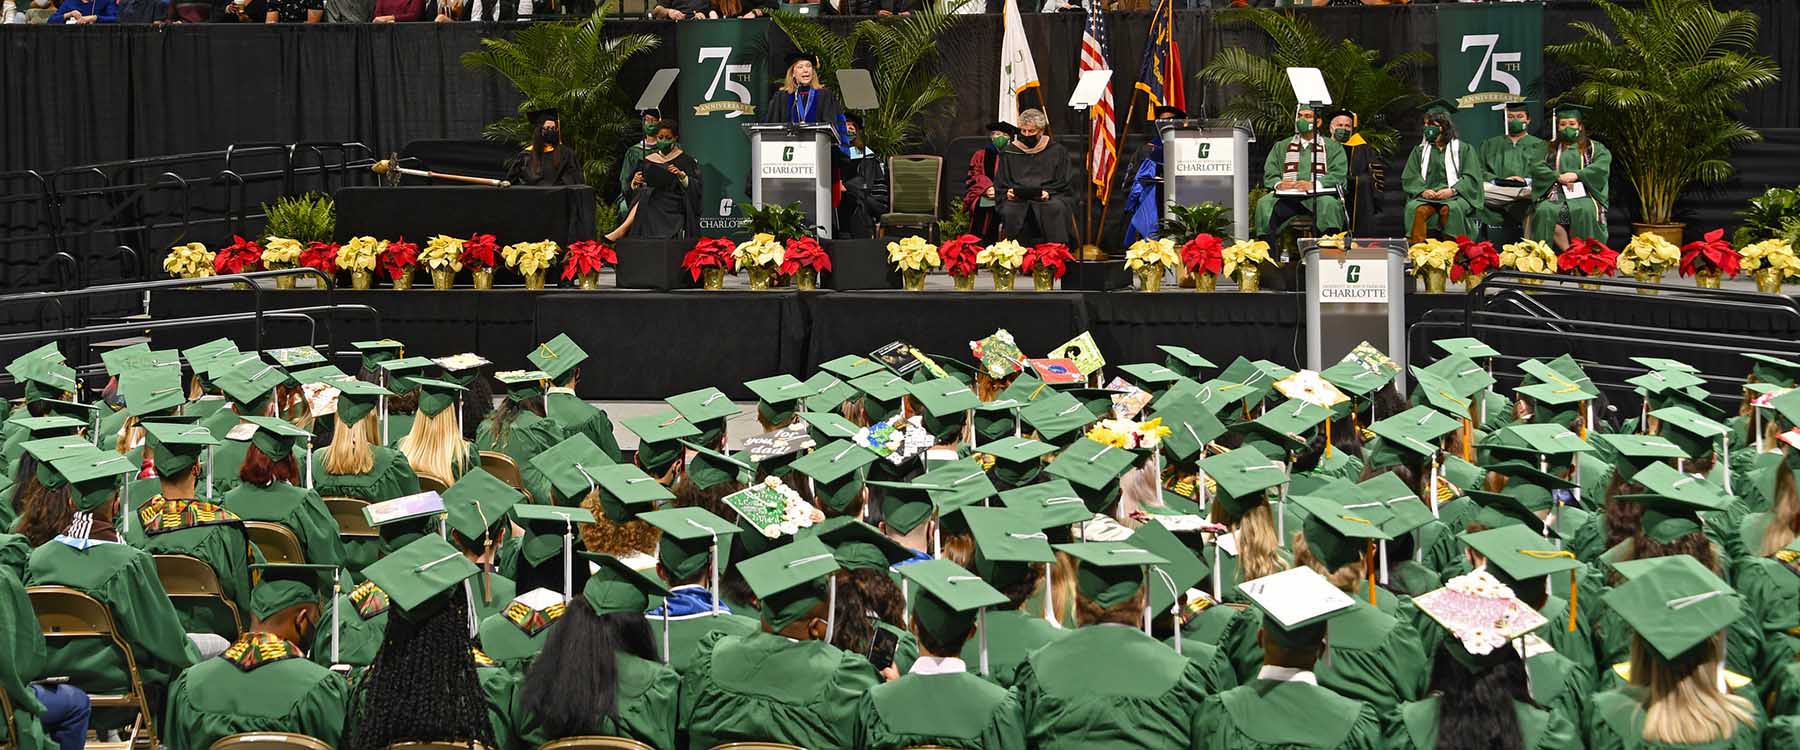 On Friday and Saturday, Dec. 16-17, UNC Charlotte will hold Fall Commencement ceremonies for 2022 graduates in Dale F. Halton Arena. 